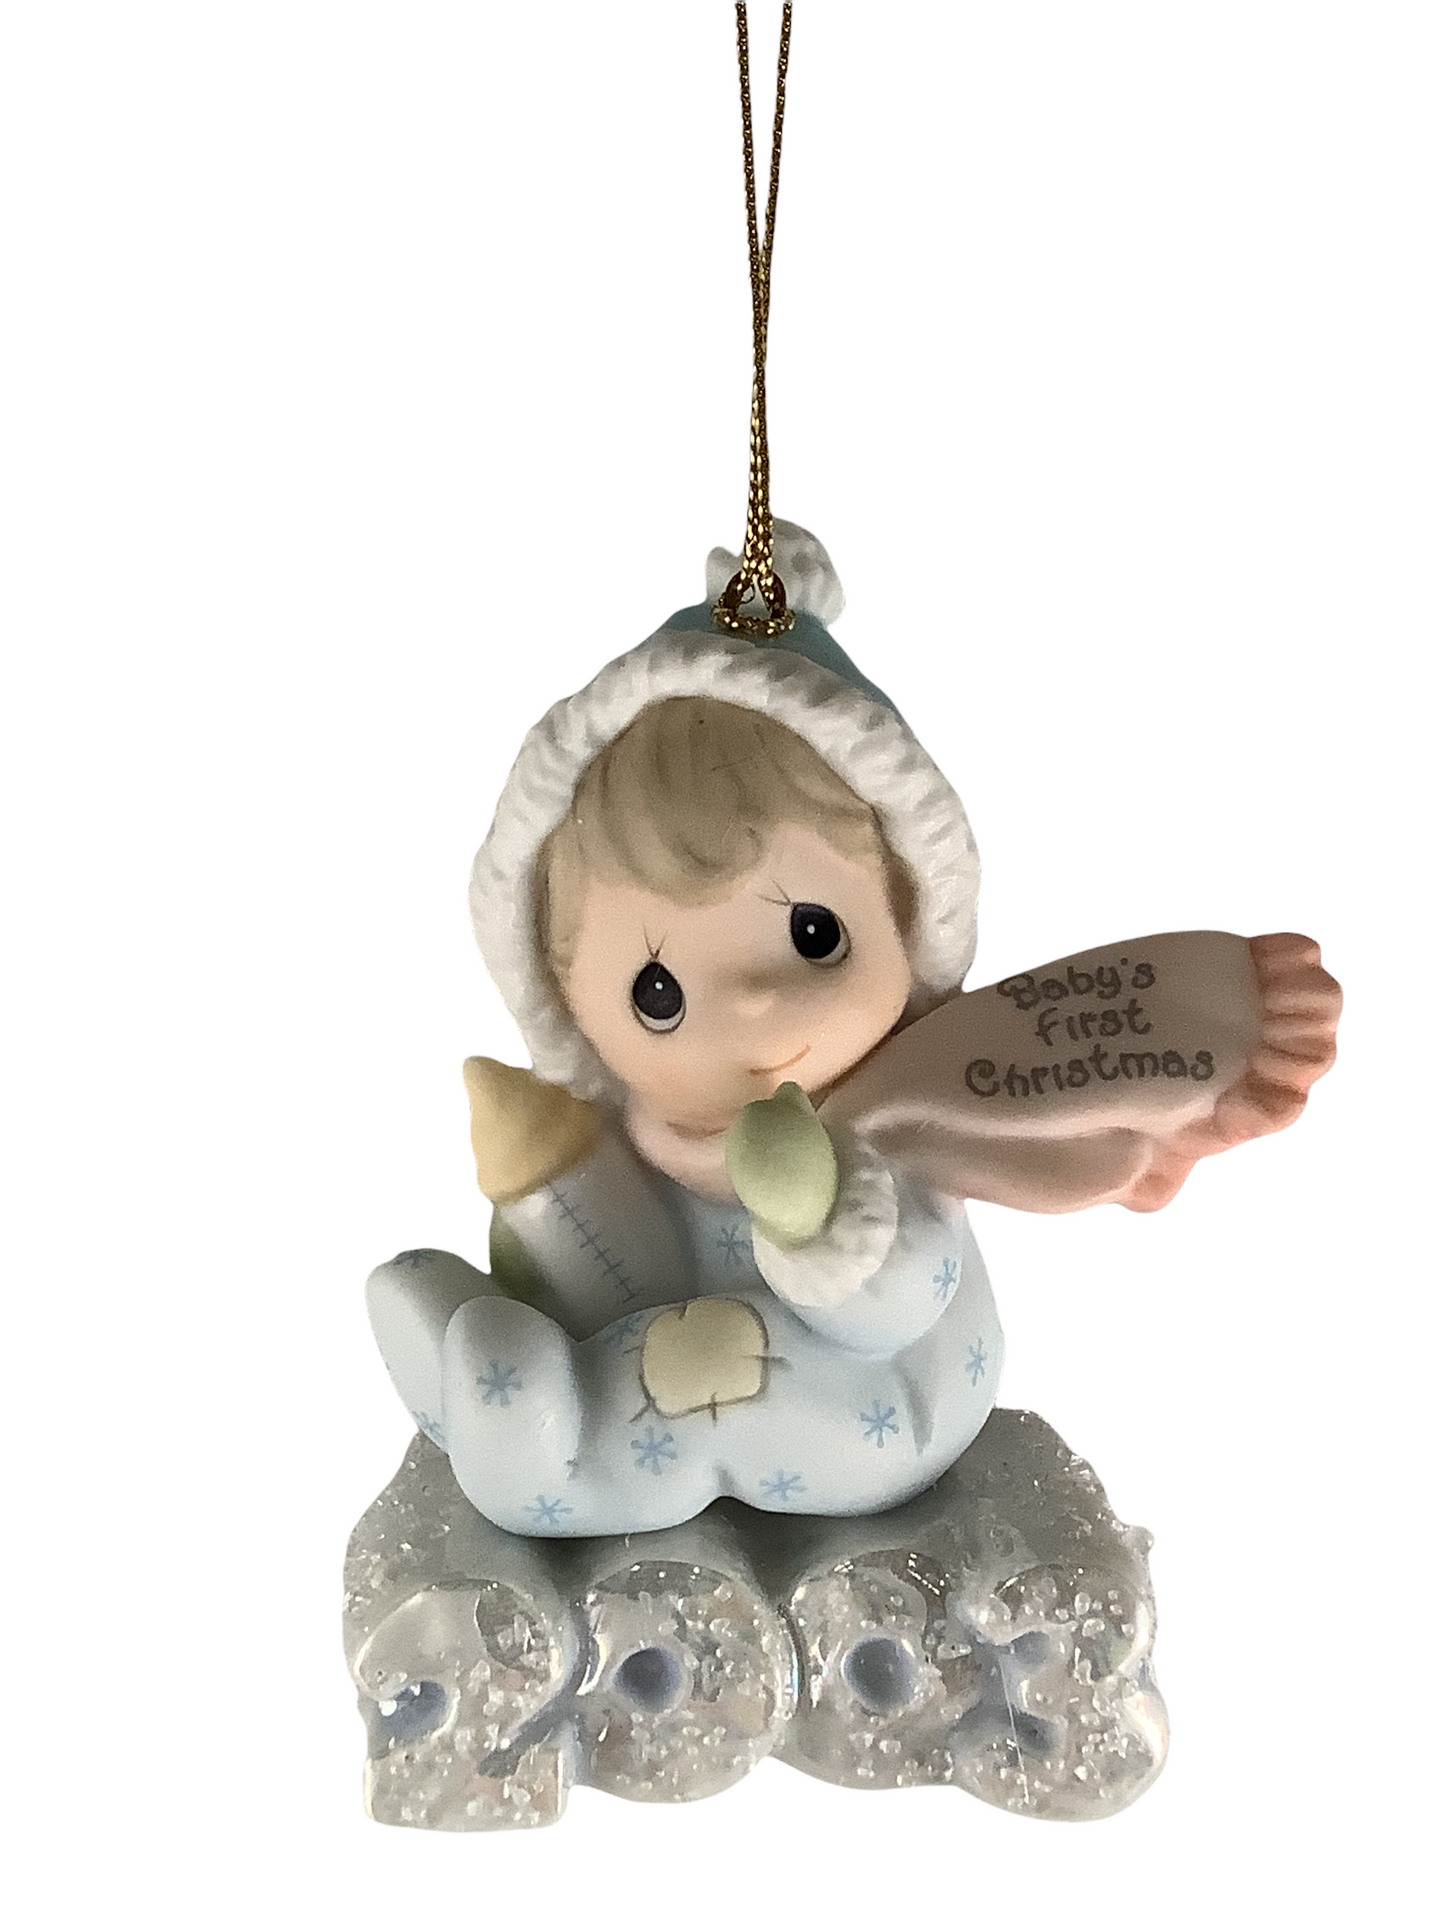 Baby's First Christmas 2003 (Boy) - Precious Moment Ornament